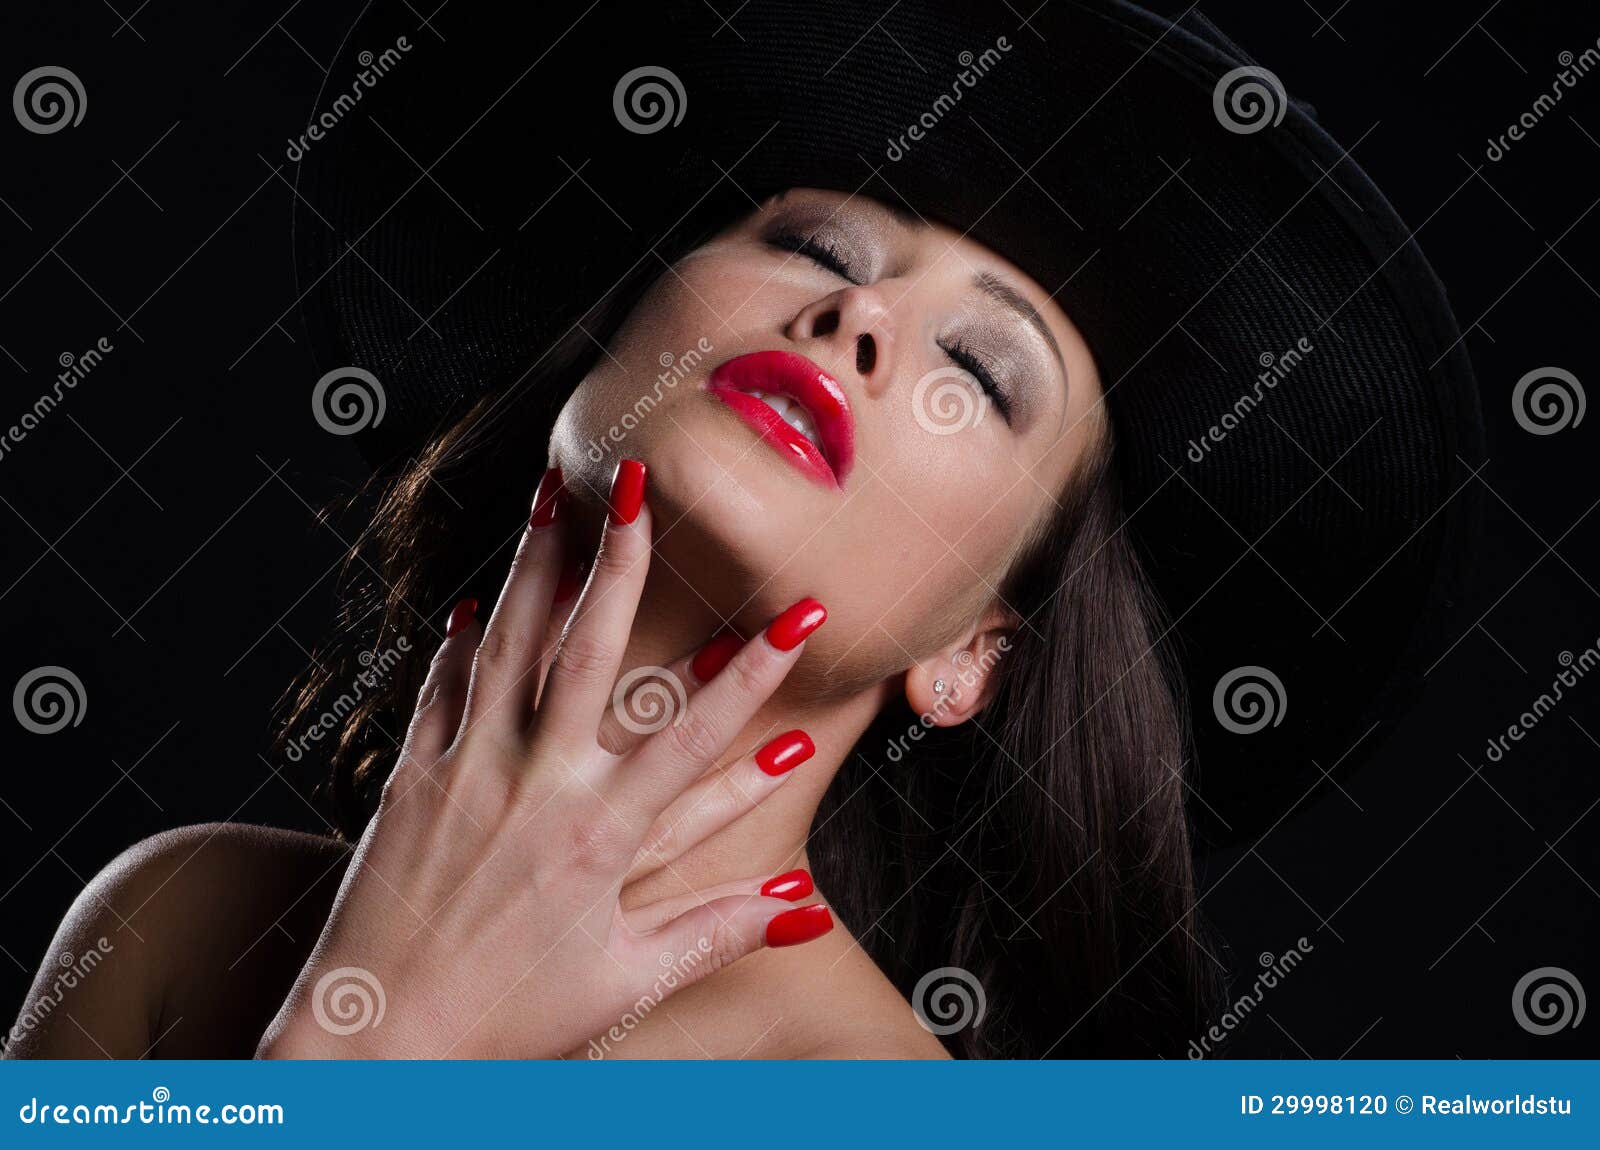 Beautiful, stylish woman in hat, posing seductivel. A beautiful, stylish and woman, posing seductively in a stylish hat with bright red nails and lips